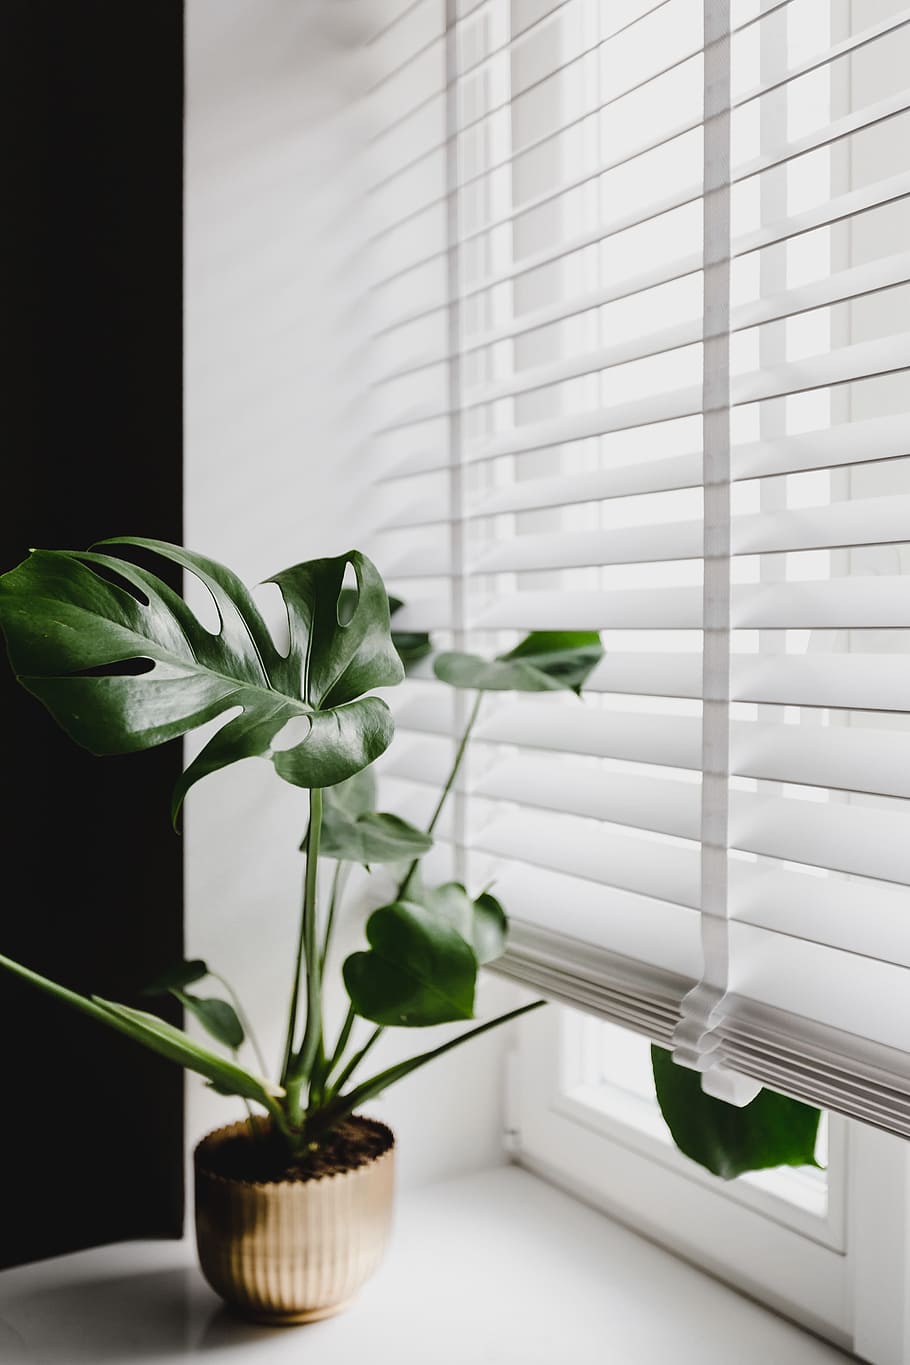 A plant sitting in front of white window blinds - Plants